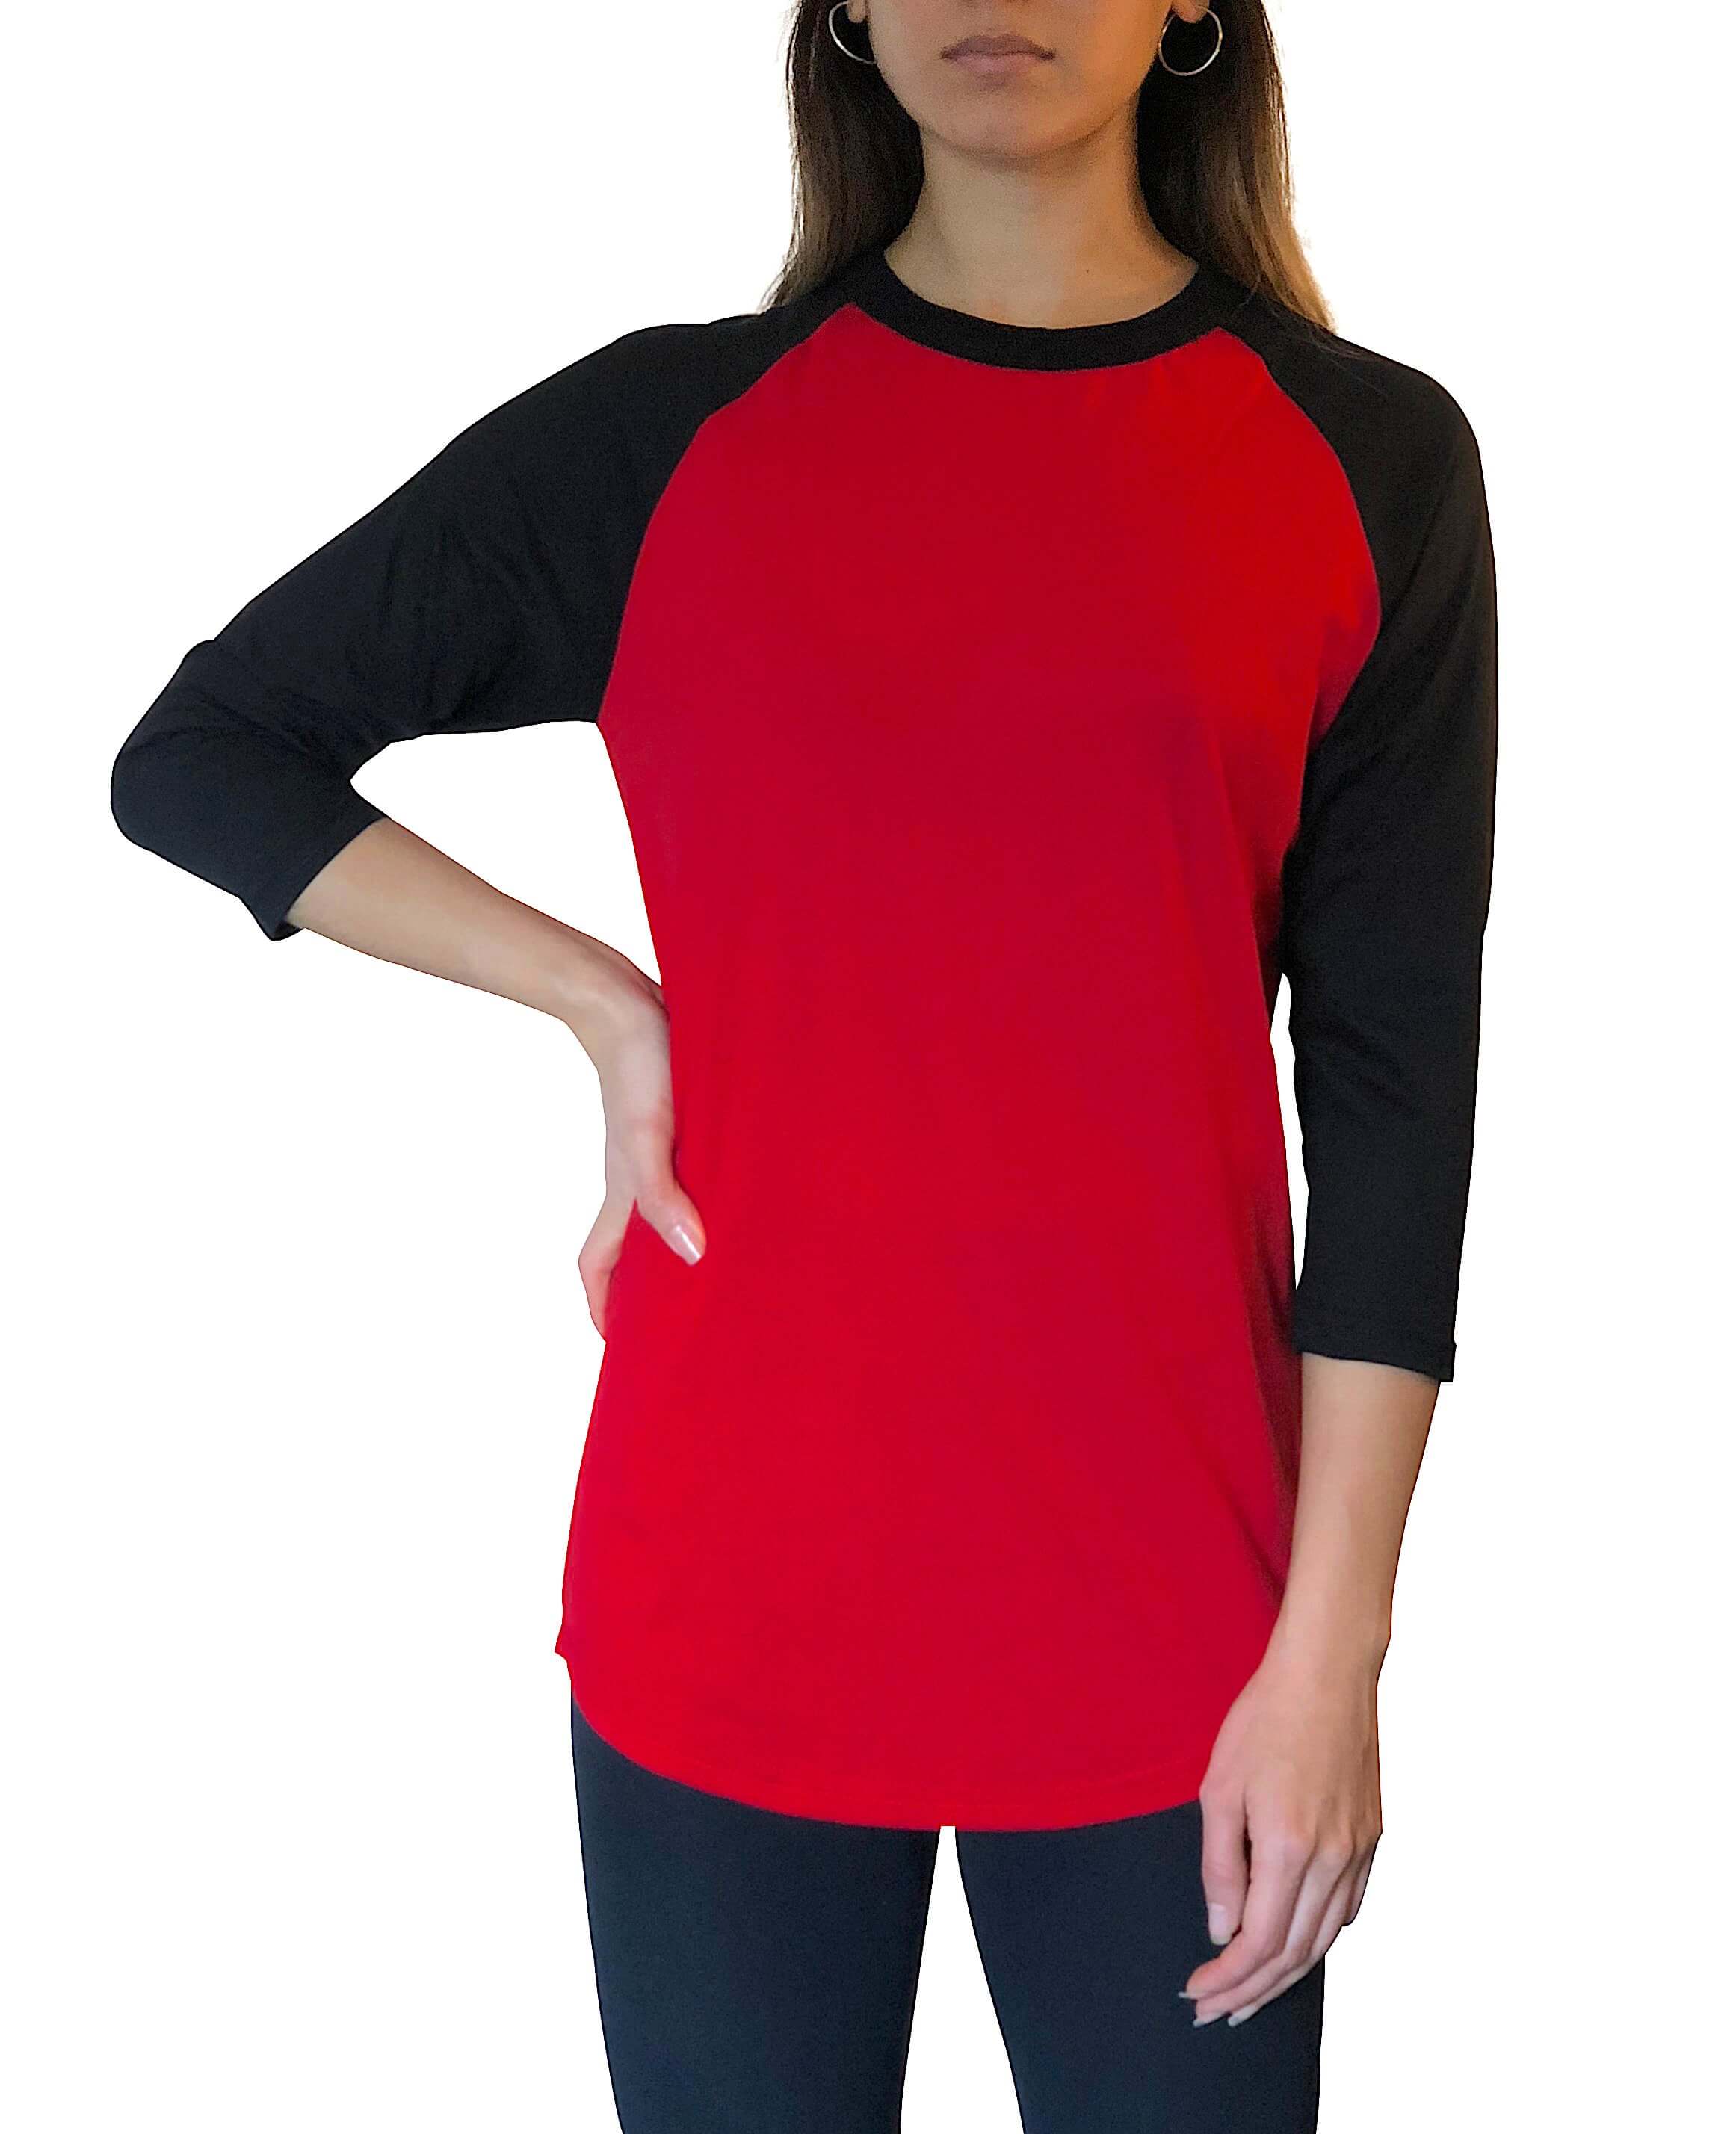 Plus Size Baseball Shirt - Black with Red Sleeves